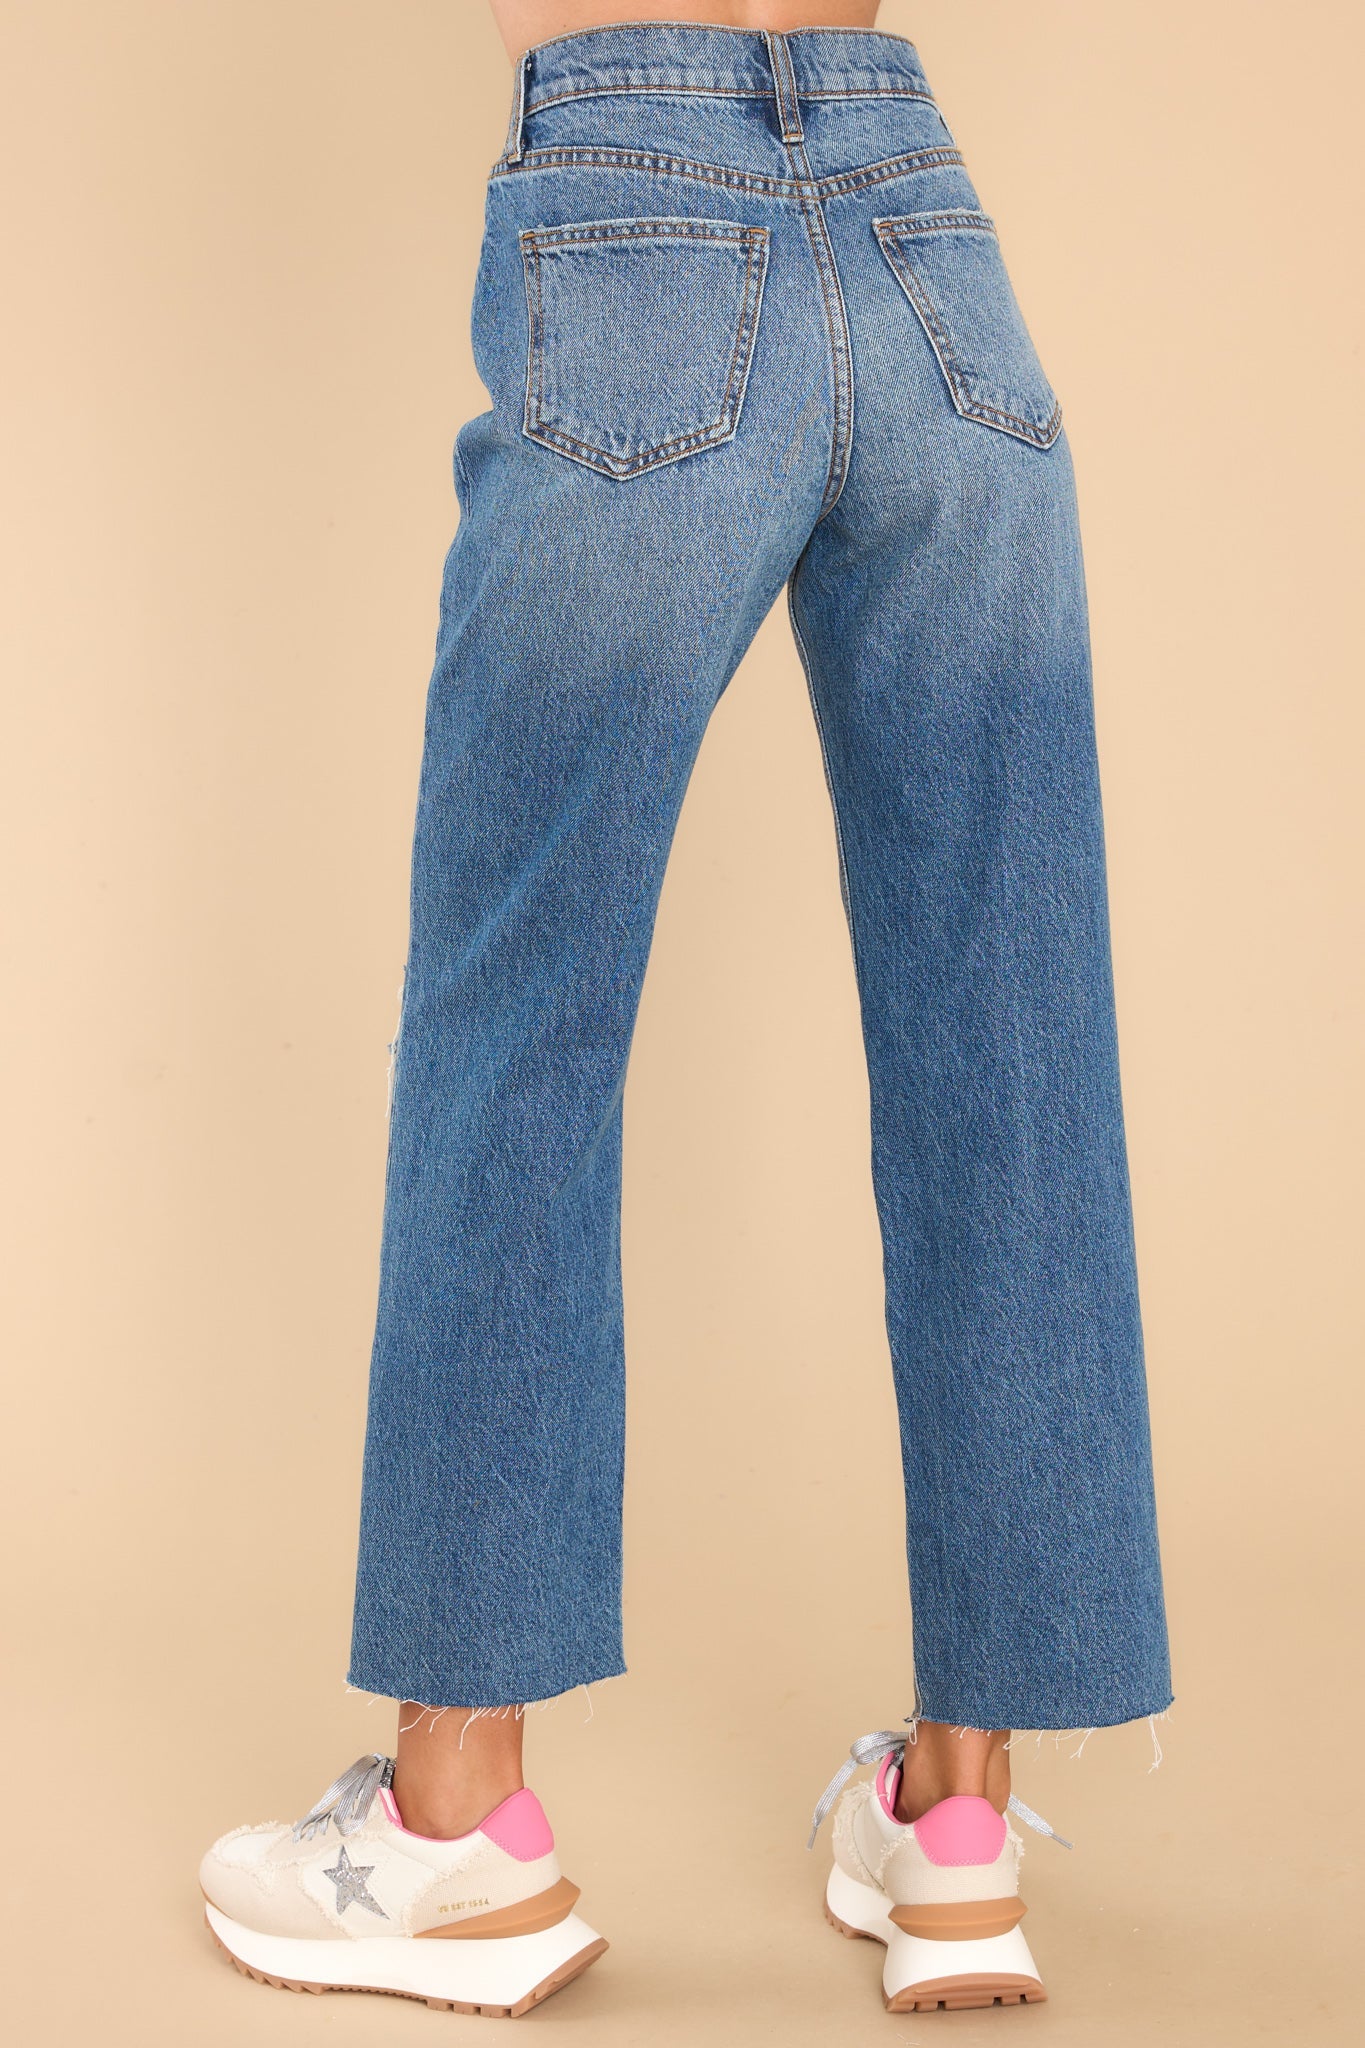 Levi's Ribcage Wide Leg Jeans  7 Fall Pants Trends More Enticing